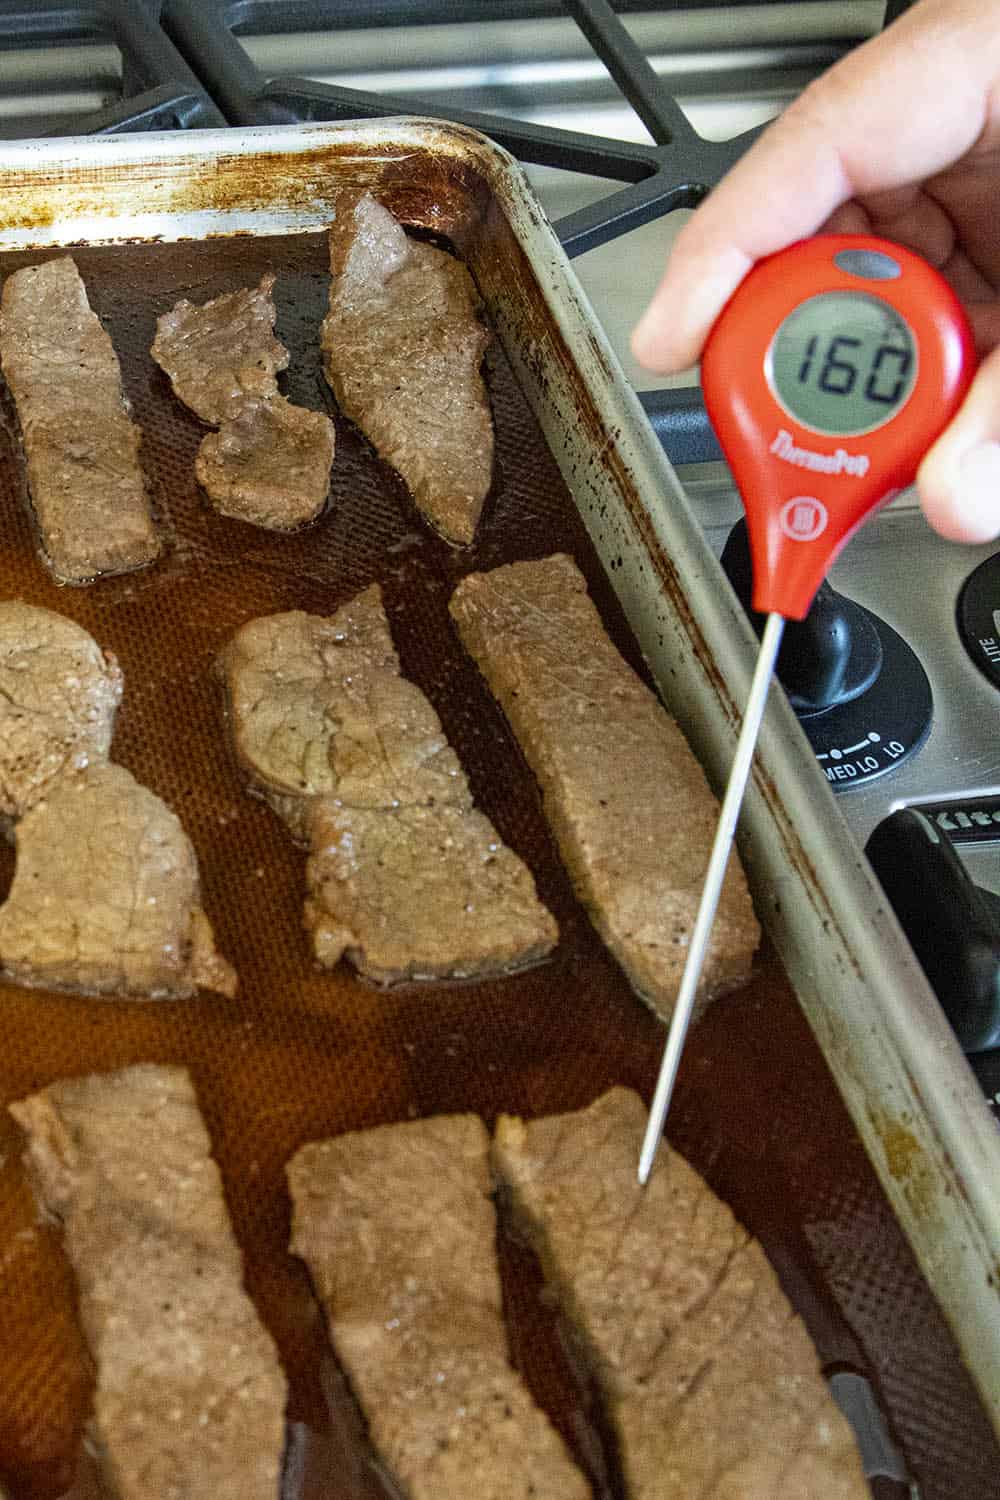 Checking the temperature of my cooked beef - 160 degrees F.